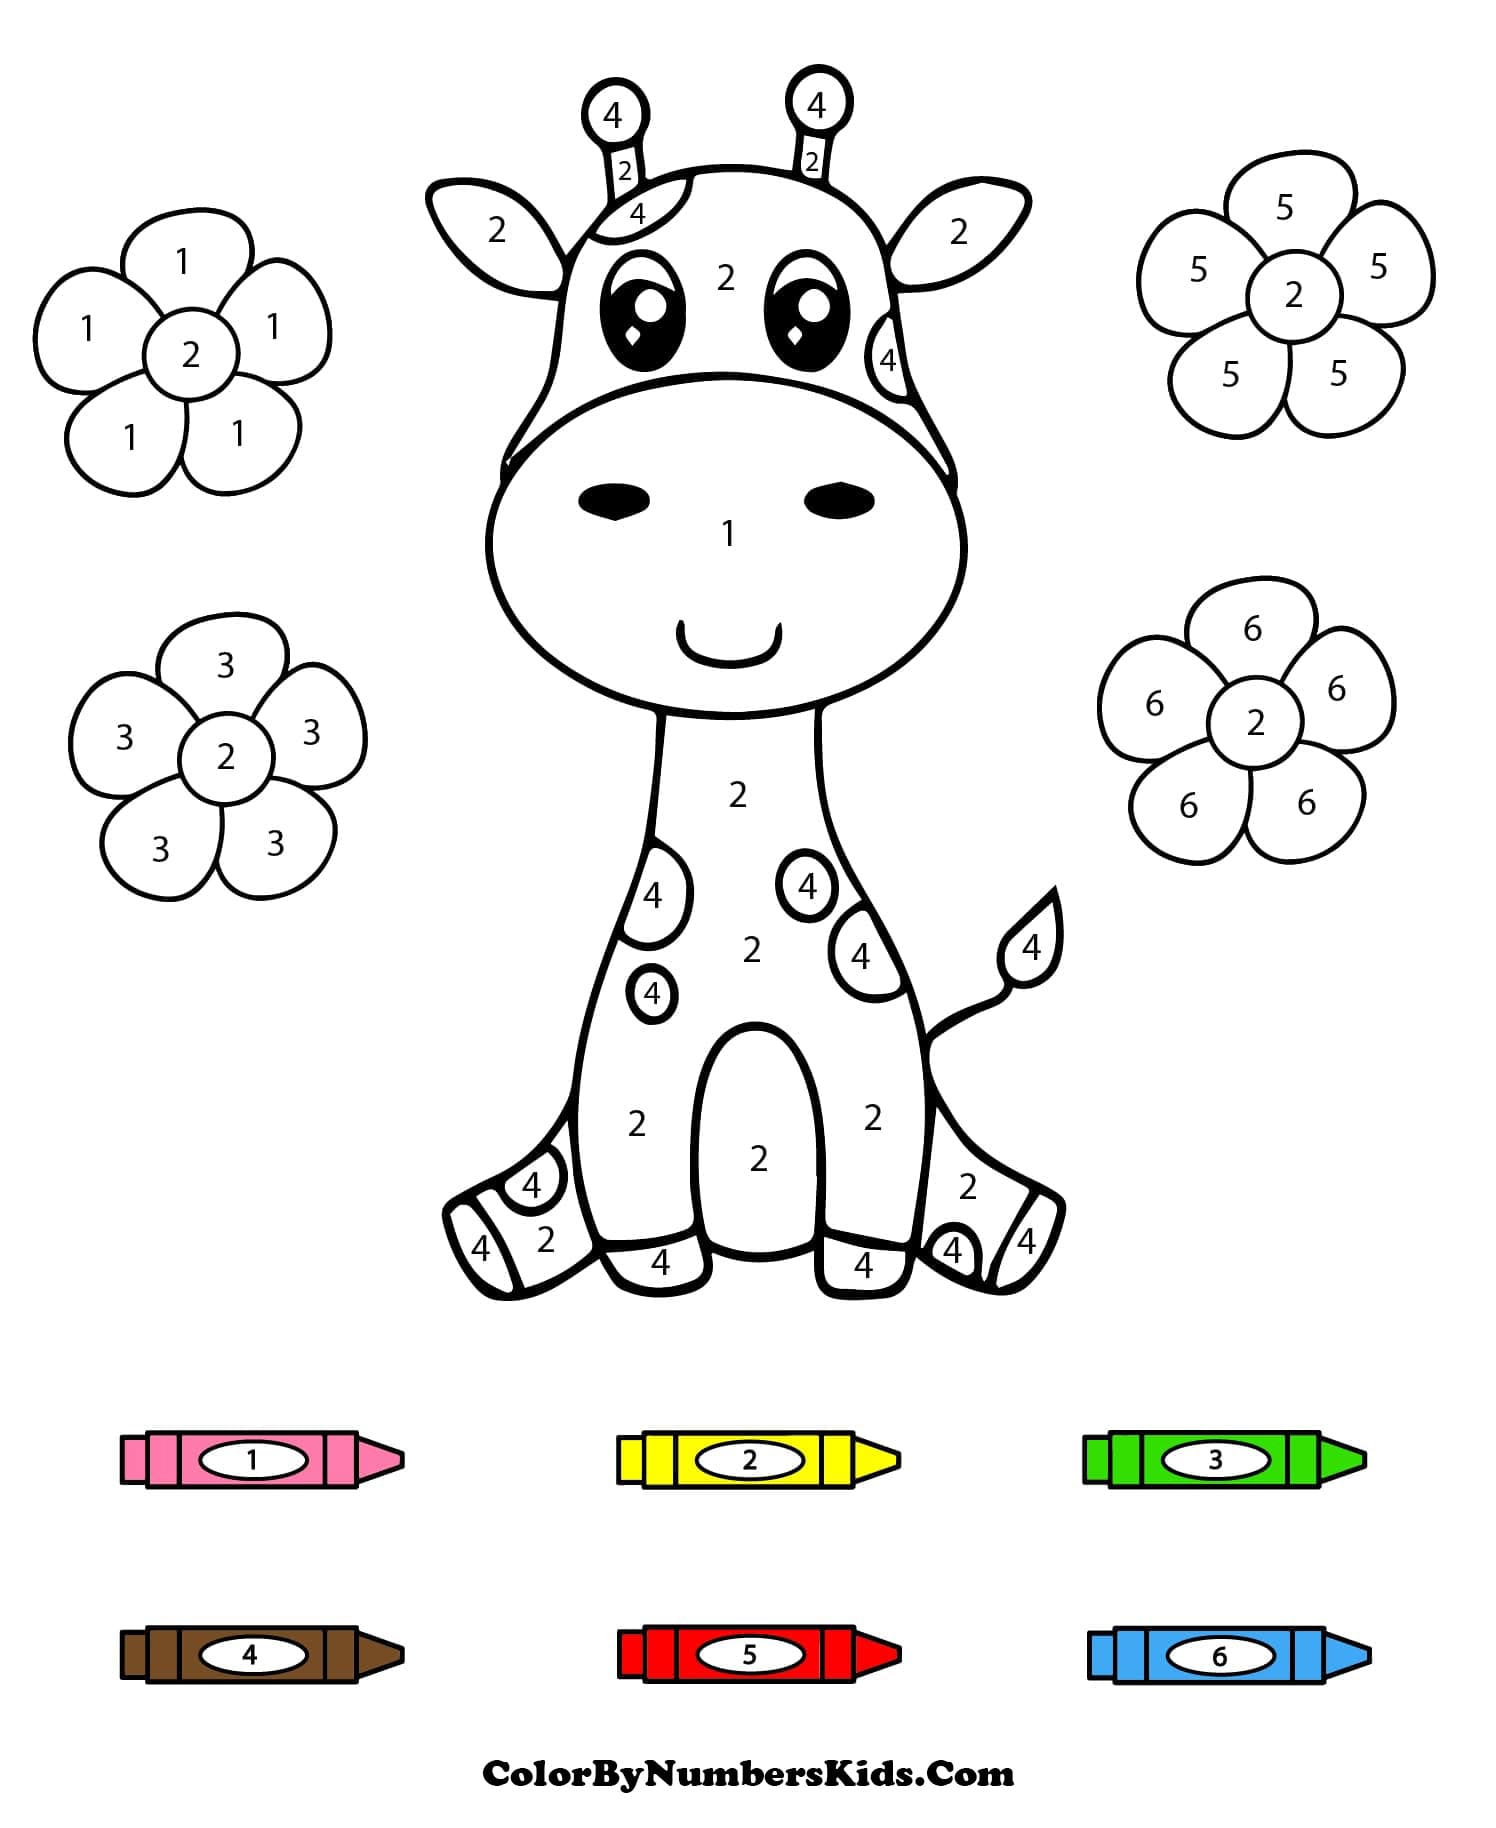 Color by Numbers for Kids: Fun & Educational Activities!